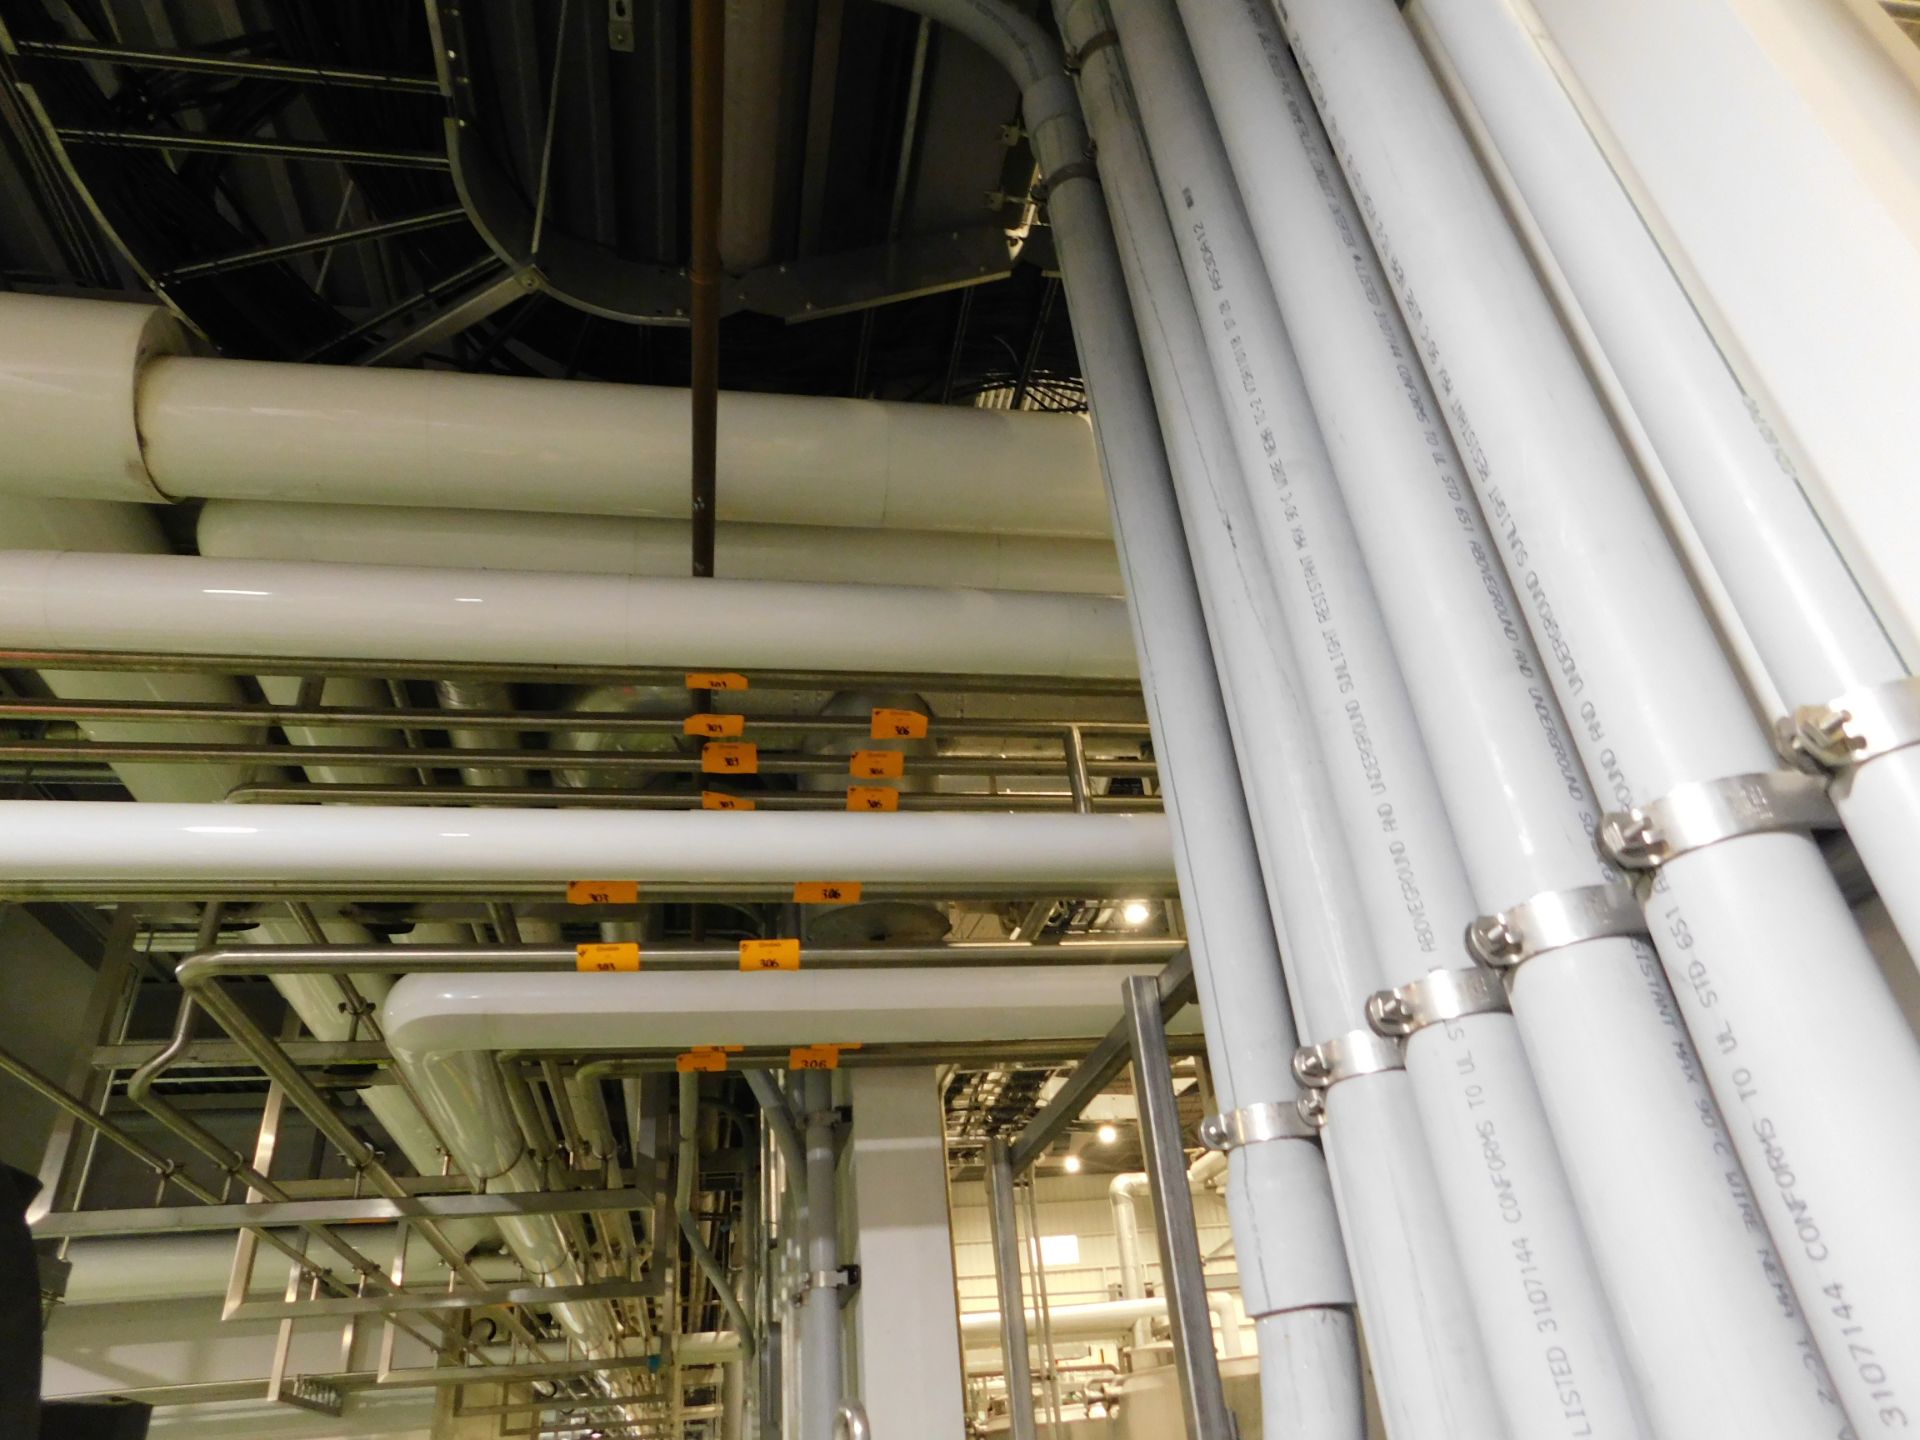 Stainless Steel Piping - Image 2 of 8